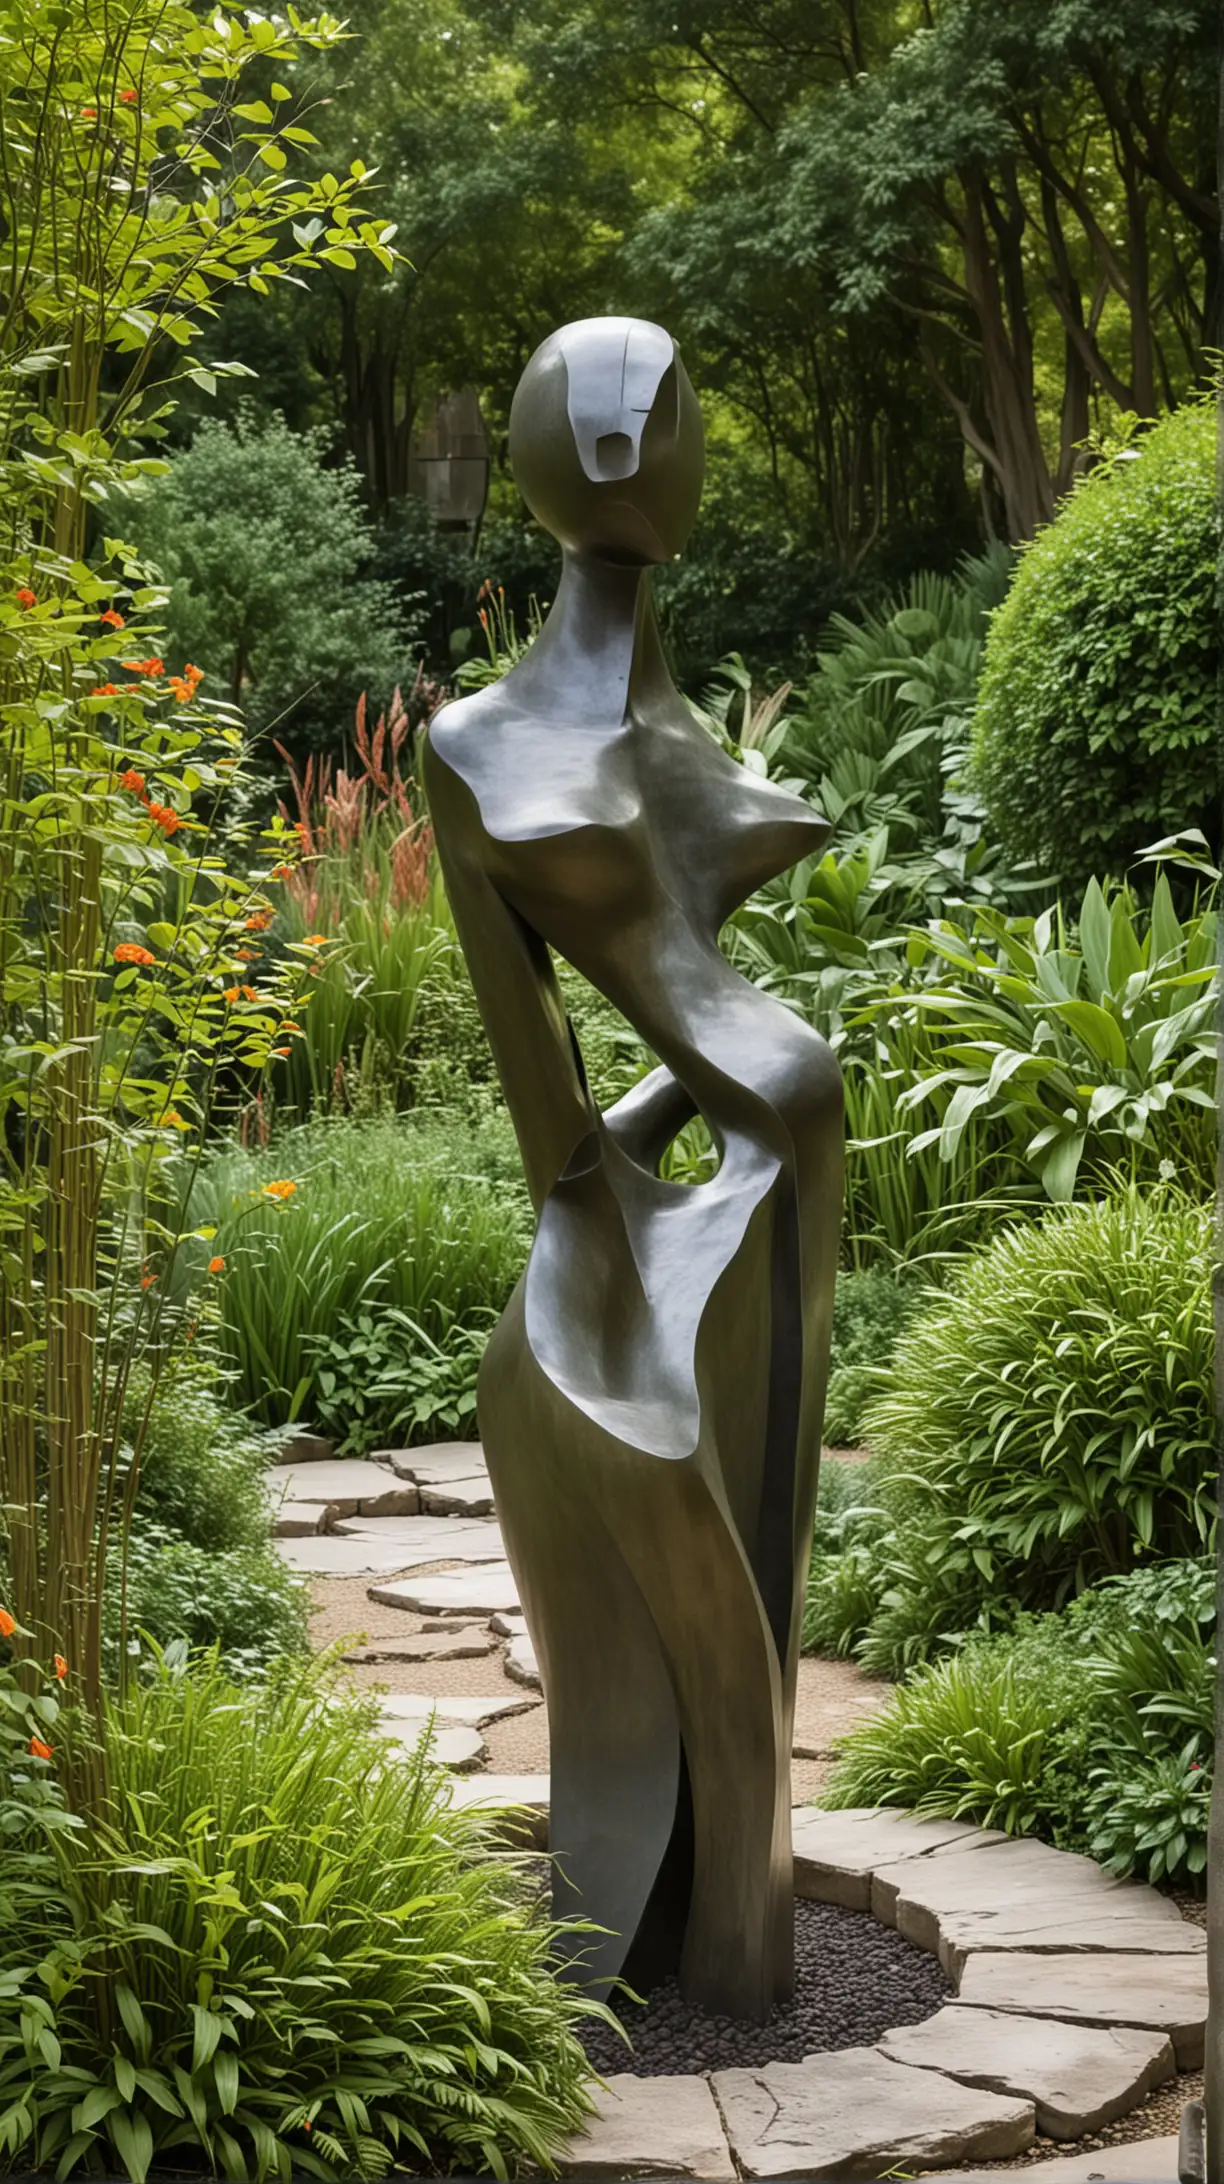 Sculpture Garden Vibrant Array of Abstract and Figurative Sculptures Amidst Lush Landscaping